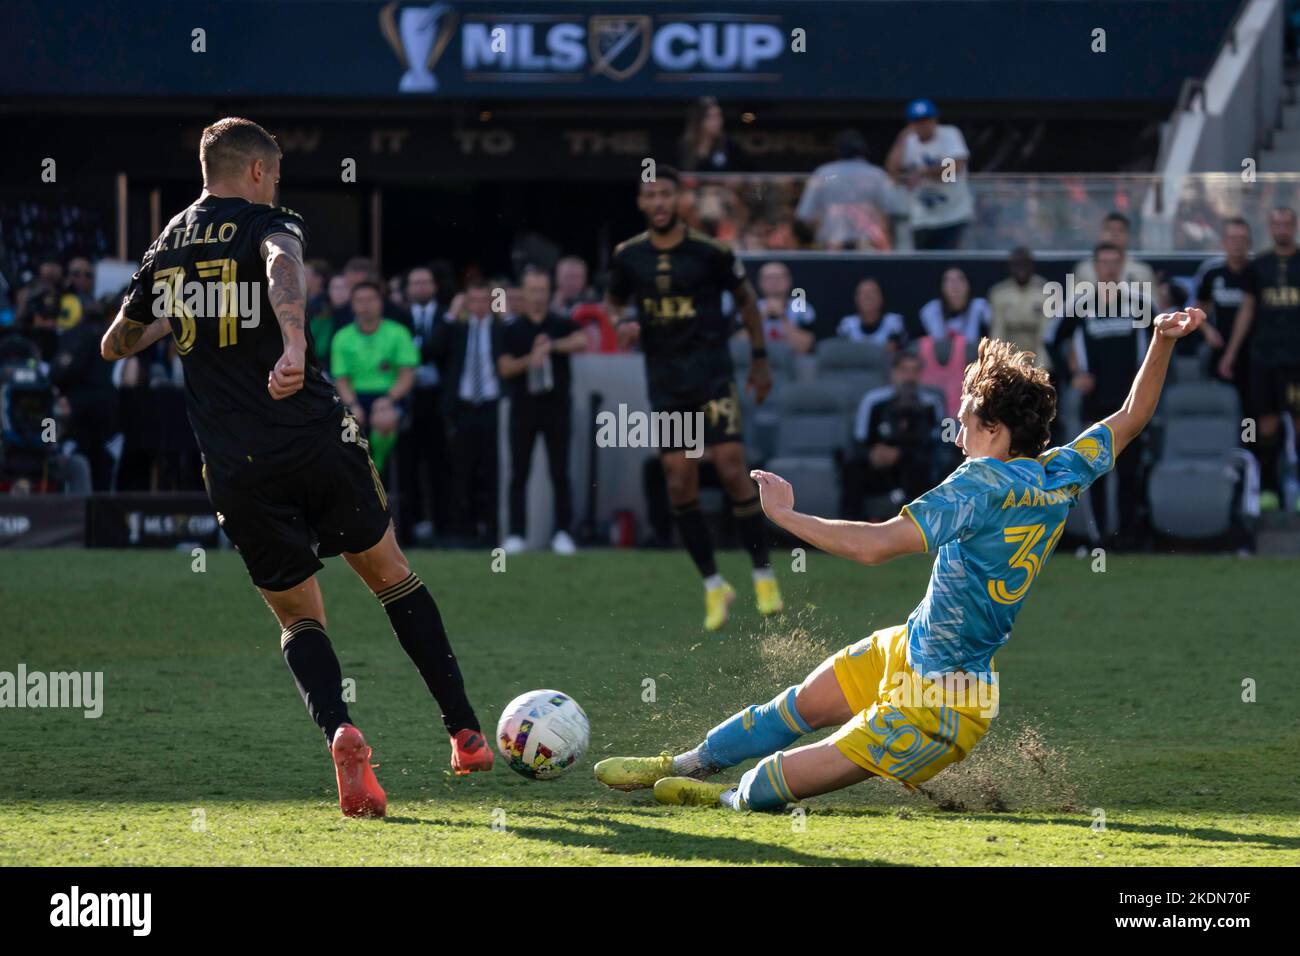 Philadelphia Union midfielder Paxten Aaronson (30) challenges Los Angeles FC midfielder Cristian Tello (37) for possession during the MLS Cup match, S Stock Photo